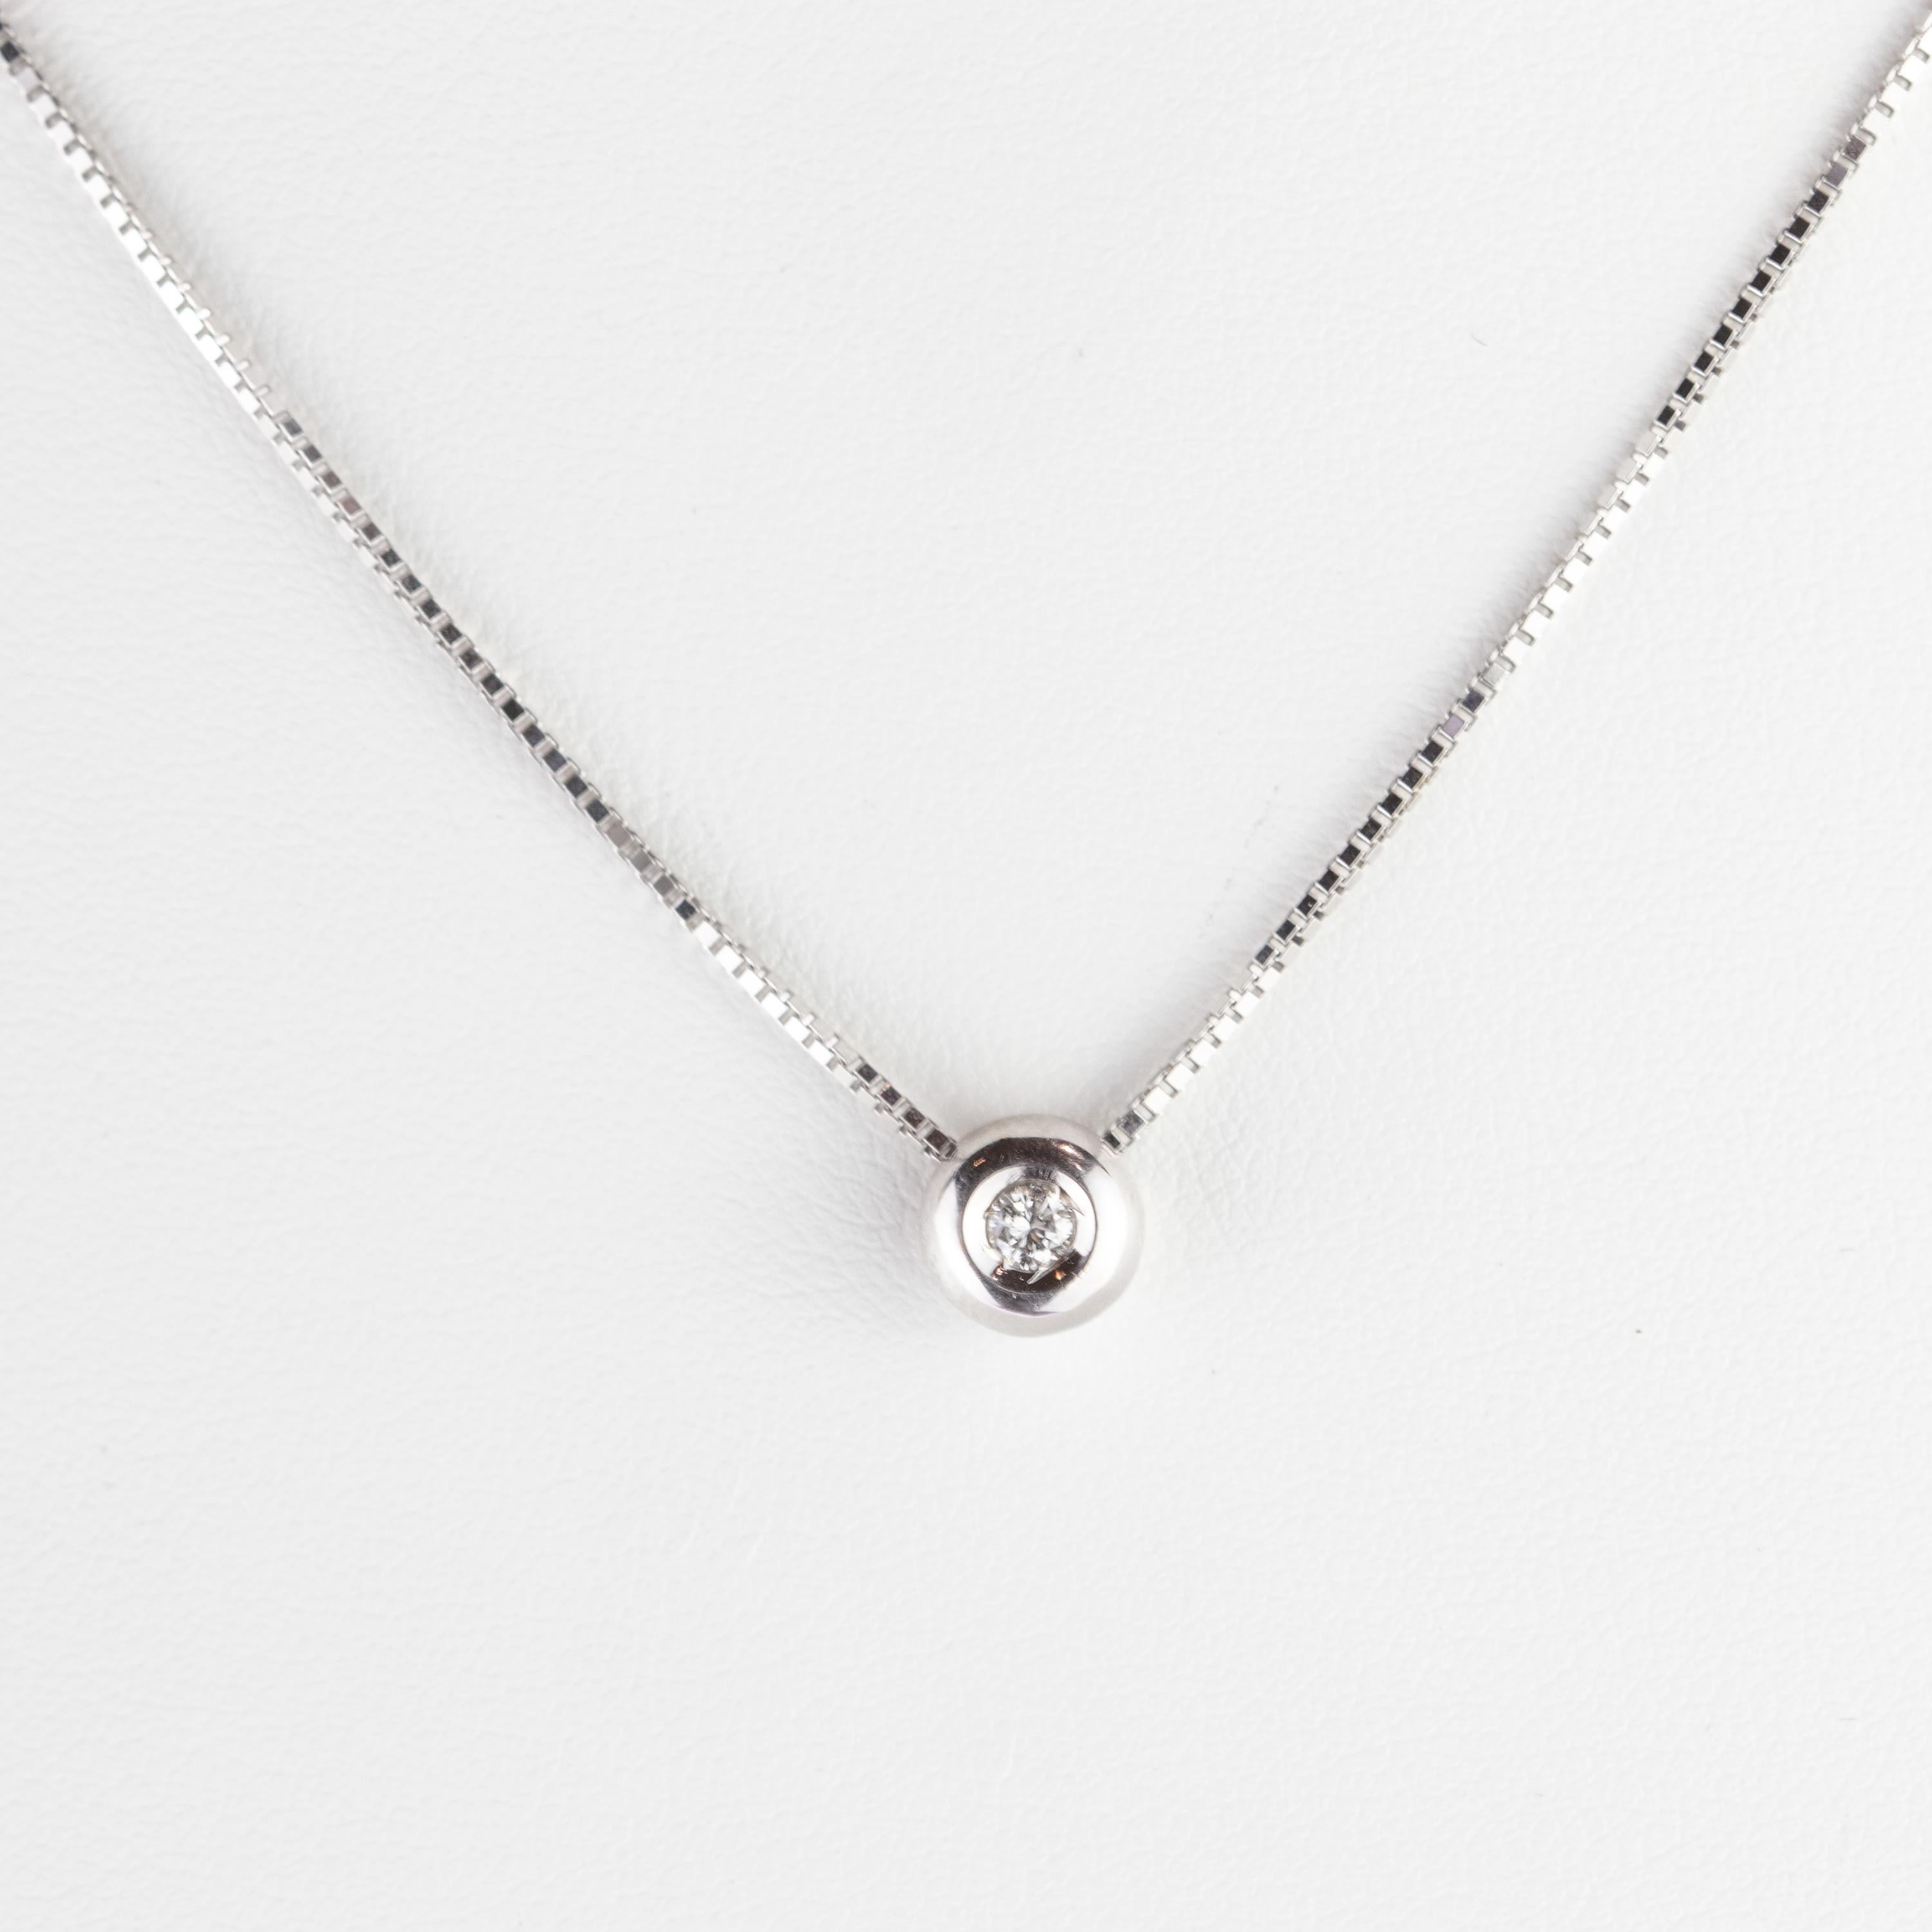 Solitaire diamond brilliant cut halo pendant surrounded by 18 karat white gold circle and holded into a white gold chain Necklace. With 0.2carat the gem highlights with a simple but bright look. Is the perfect and stylish accessory to represent a